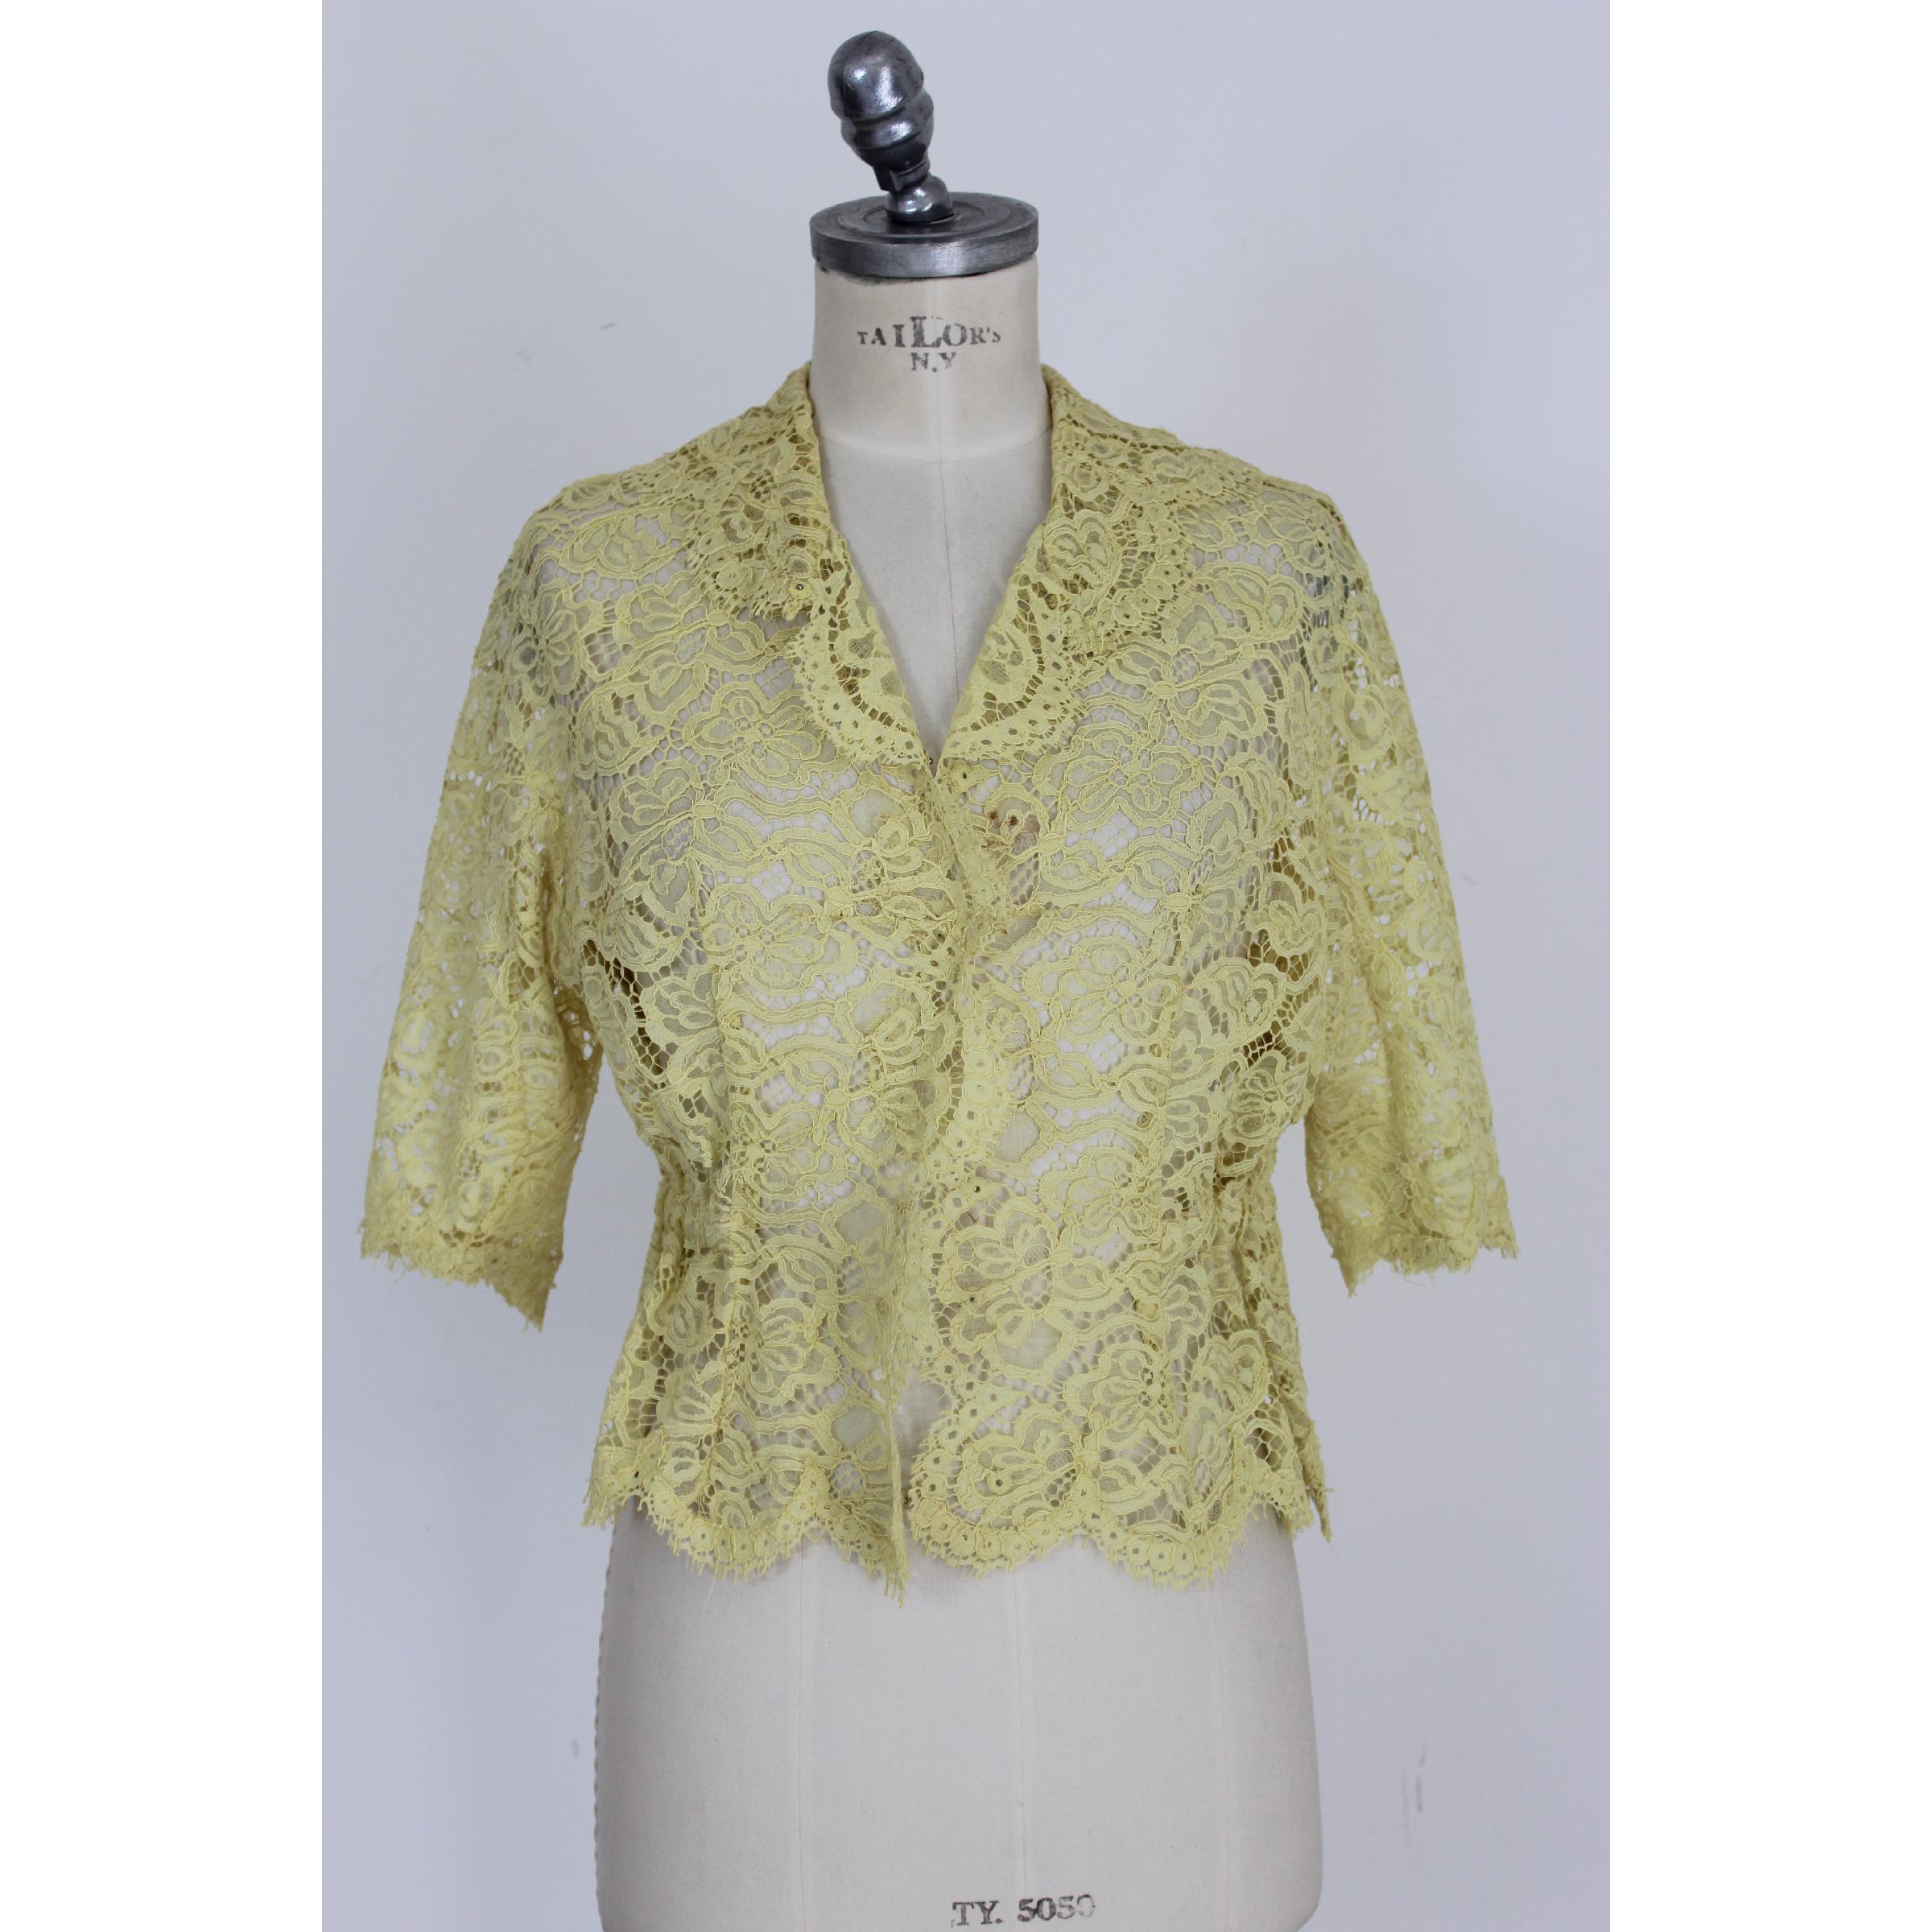 Mignon Yellow Silk Lace Museum Dress Suit Skirt and Jacket 1960s 1